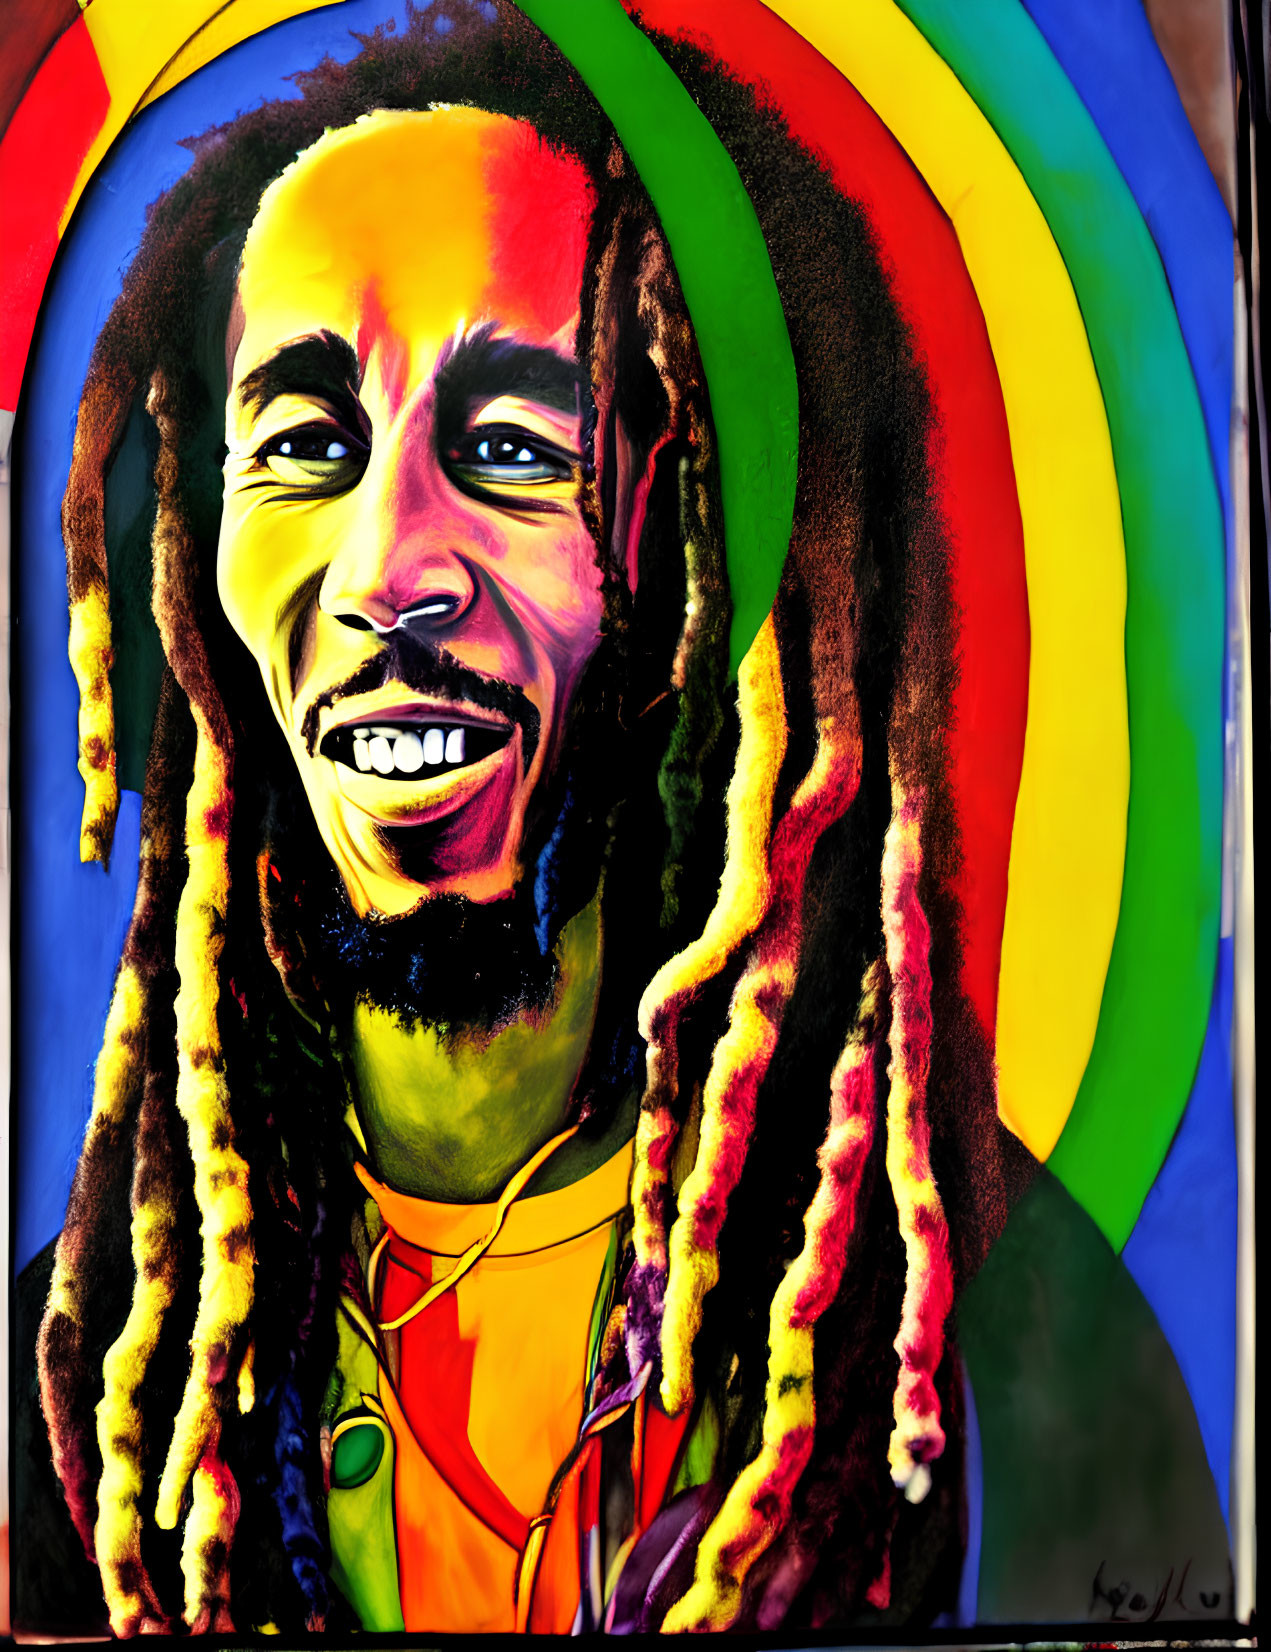 Colorful portrait with smiling person and dreadlocks against rainbow circles